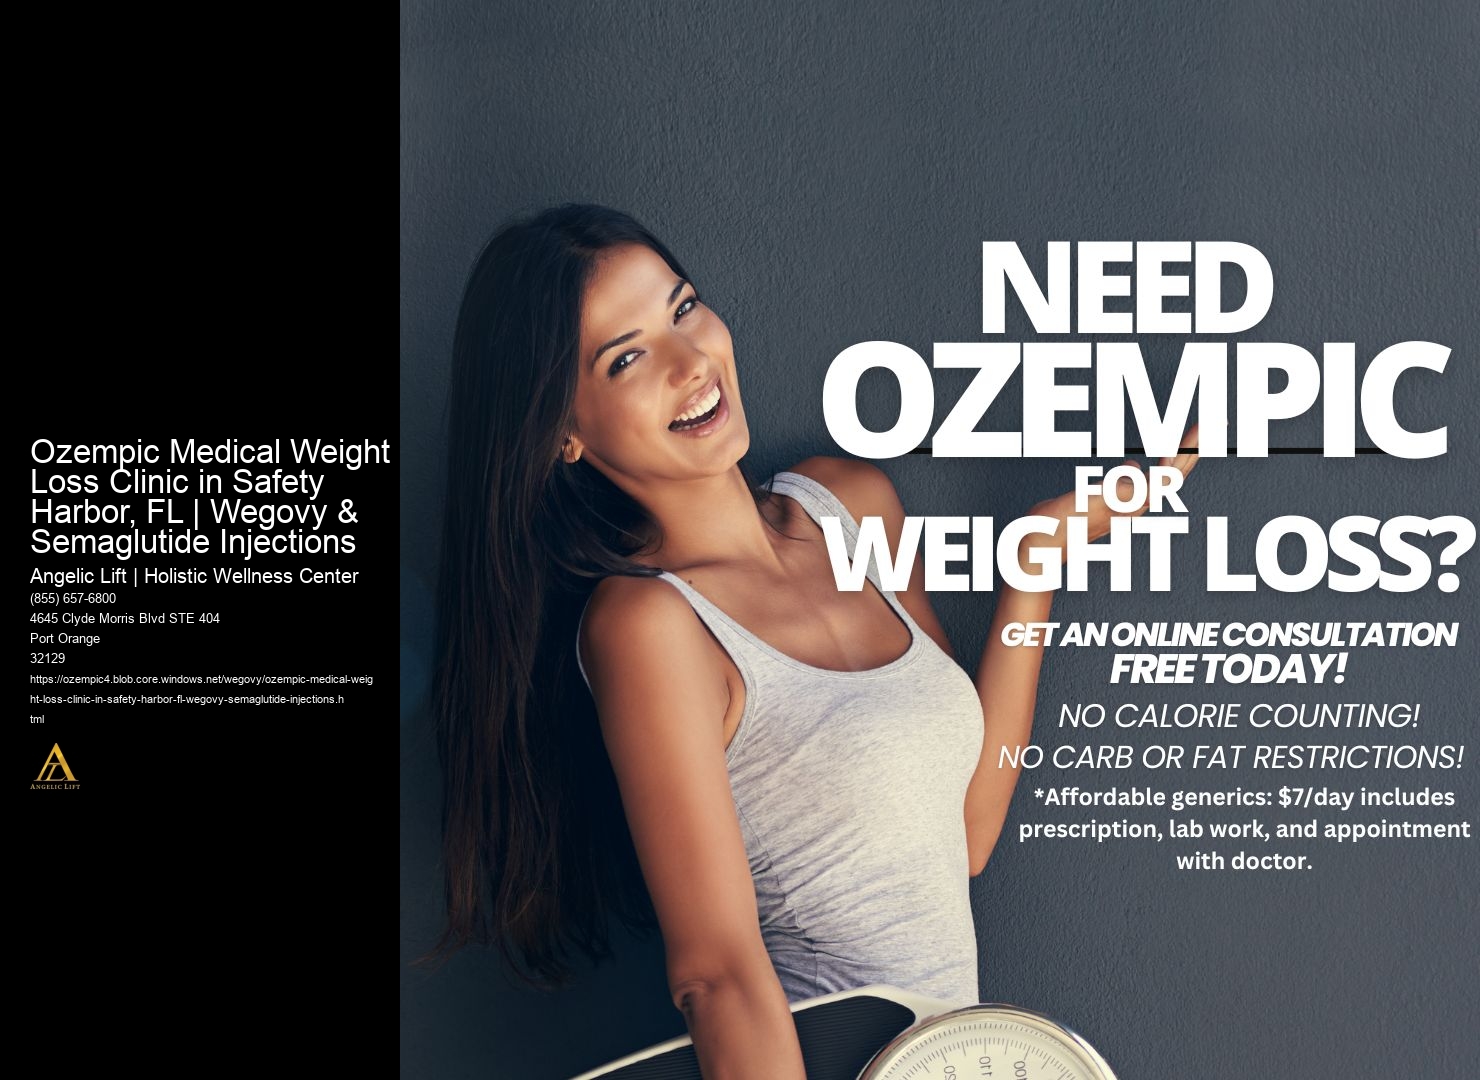 Ozempic Medical Weight Loss Clinic in Safety Harbor, FL | Wegovy & Semaglutide Injections